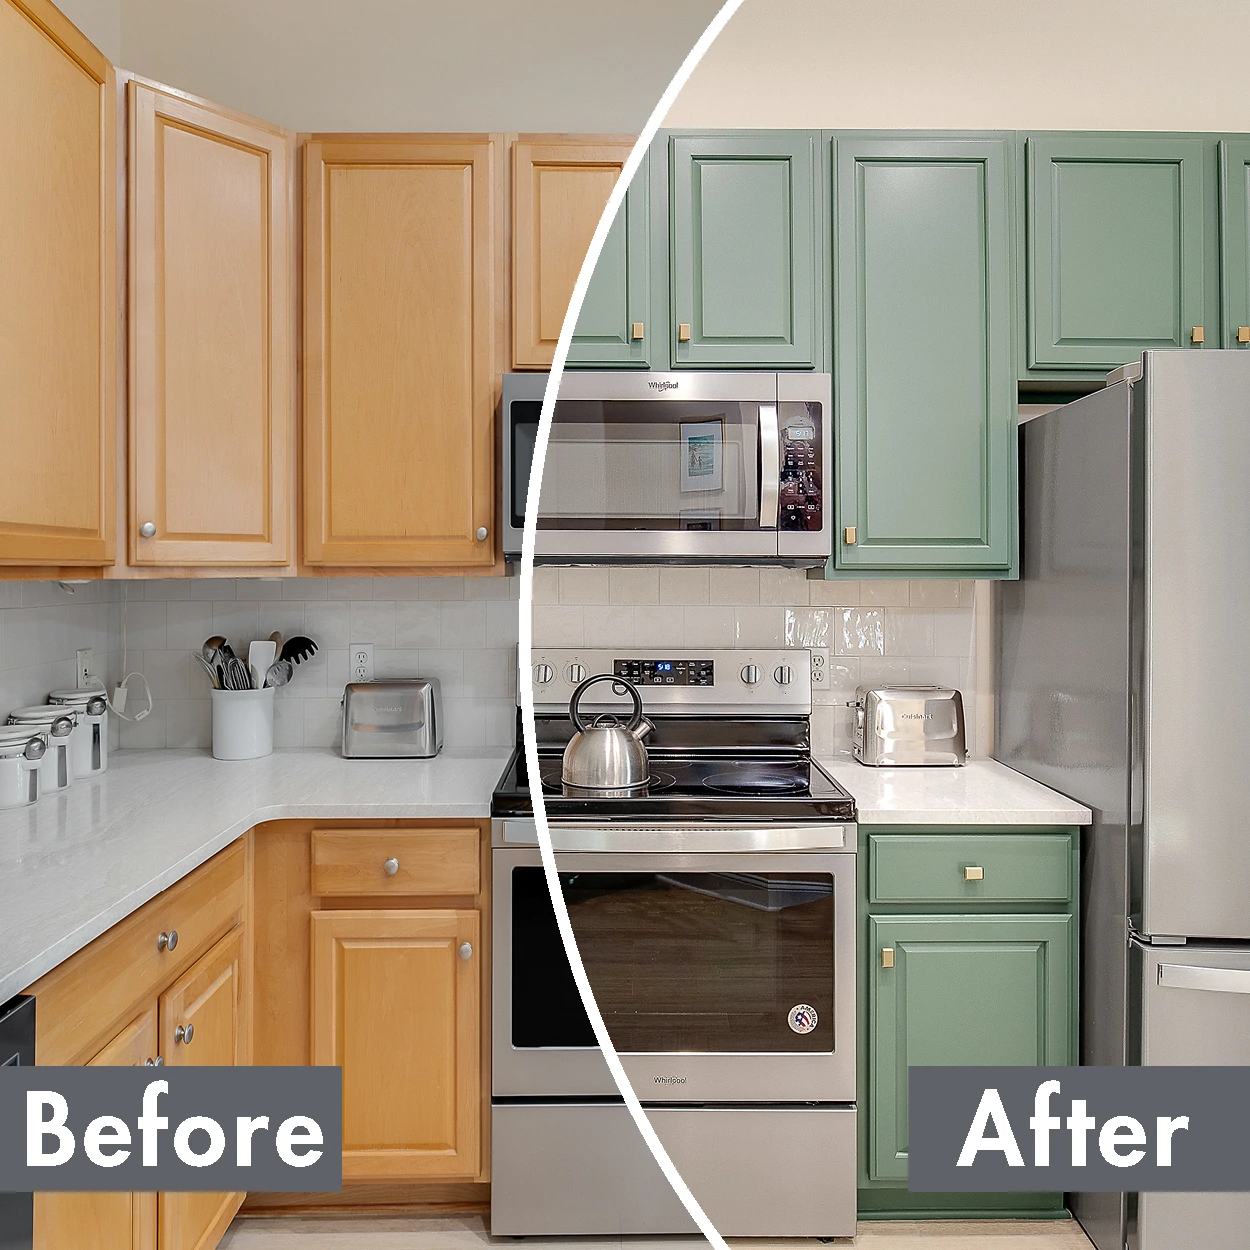 On the left, a kitchen with unpainted cabinets before N-Hance custom painted finishing. On the right, the same kitchen with the cabinets painted in a light green color, after N-Hance custom painted finishing work.